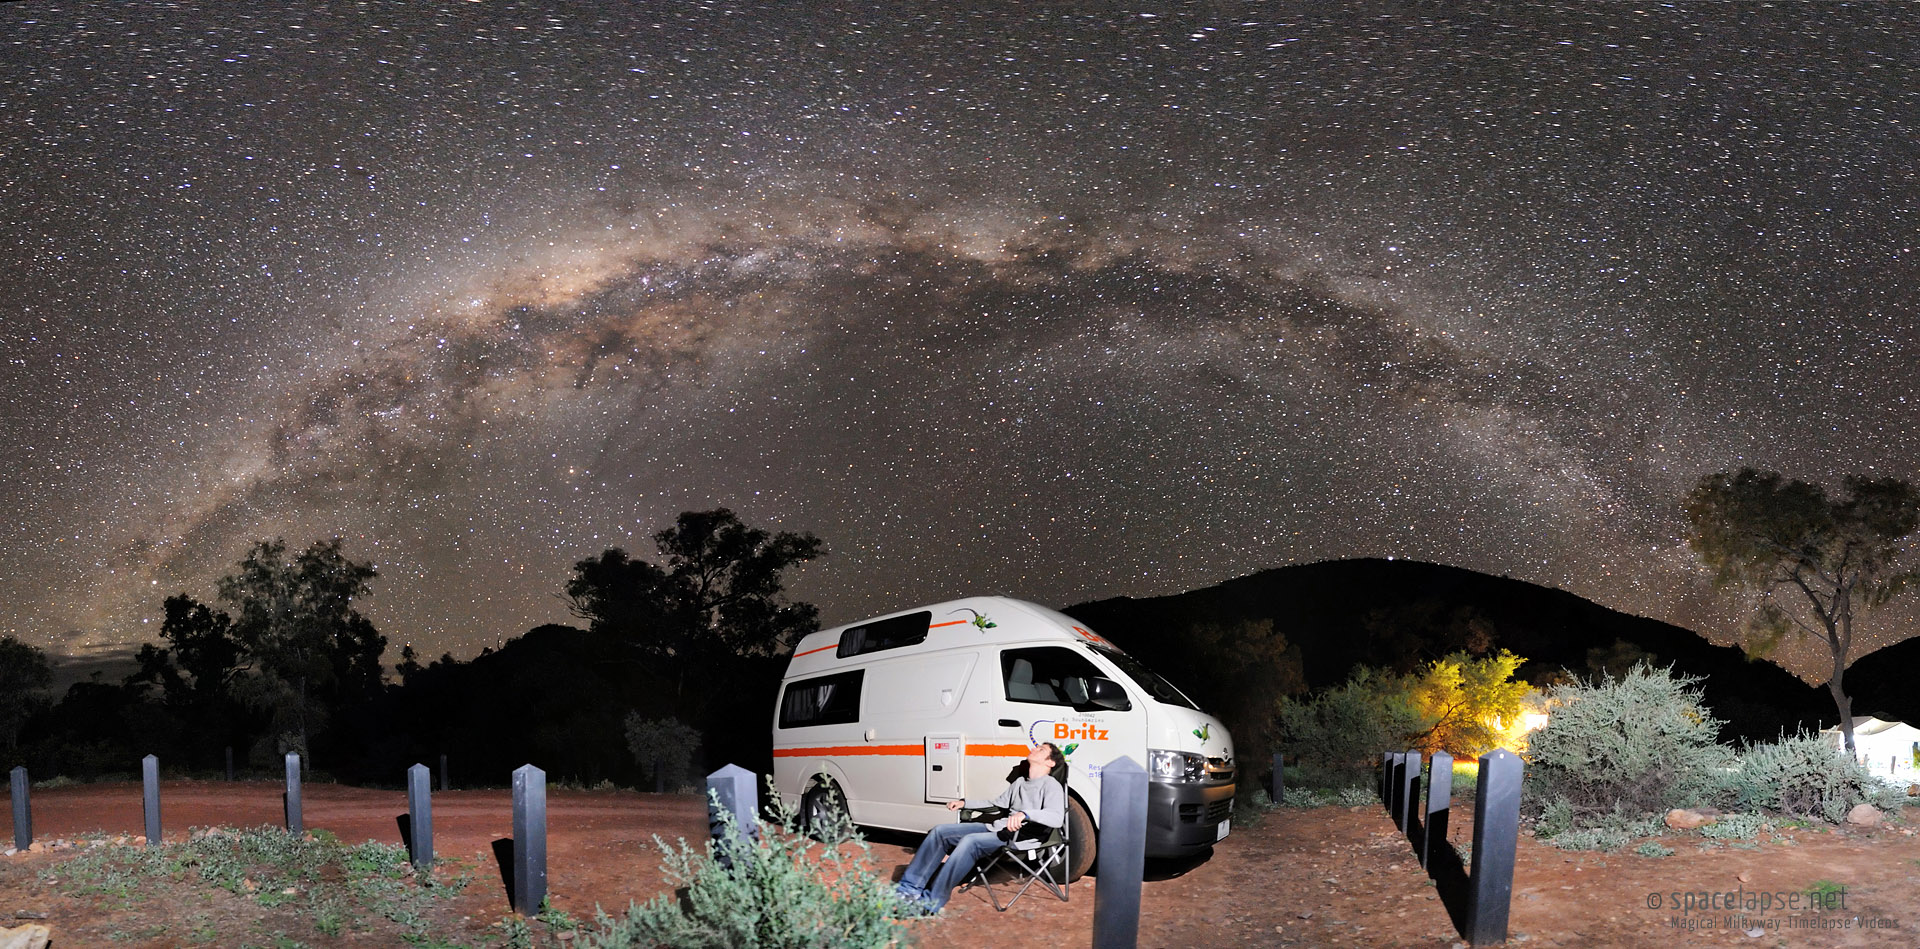 Camping below the milky way - I'm enjoying one of the most beautiful starry skies of the world